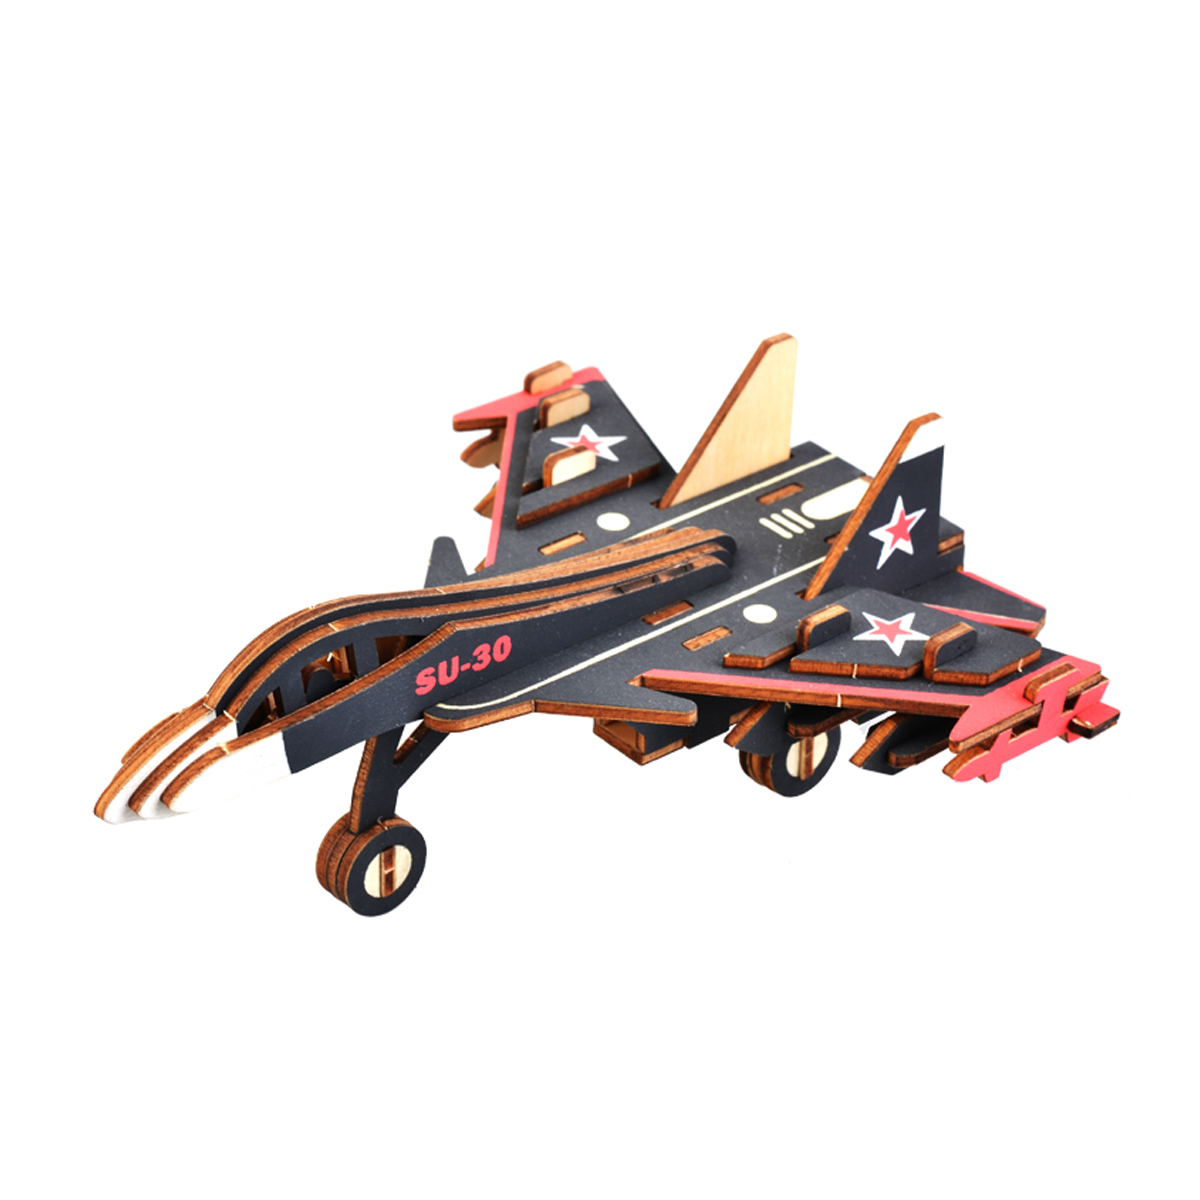 3D-Woodcraft-Assembly-Western-Fighter-Series-Kit-Jigsaw-Puzzle-Decoration-Toy-Model-for-Kids-Gift-1632732-5